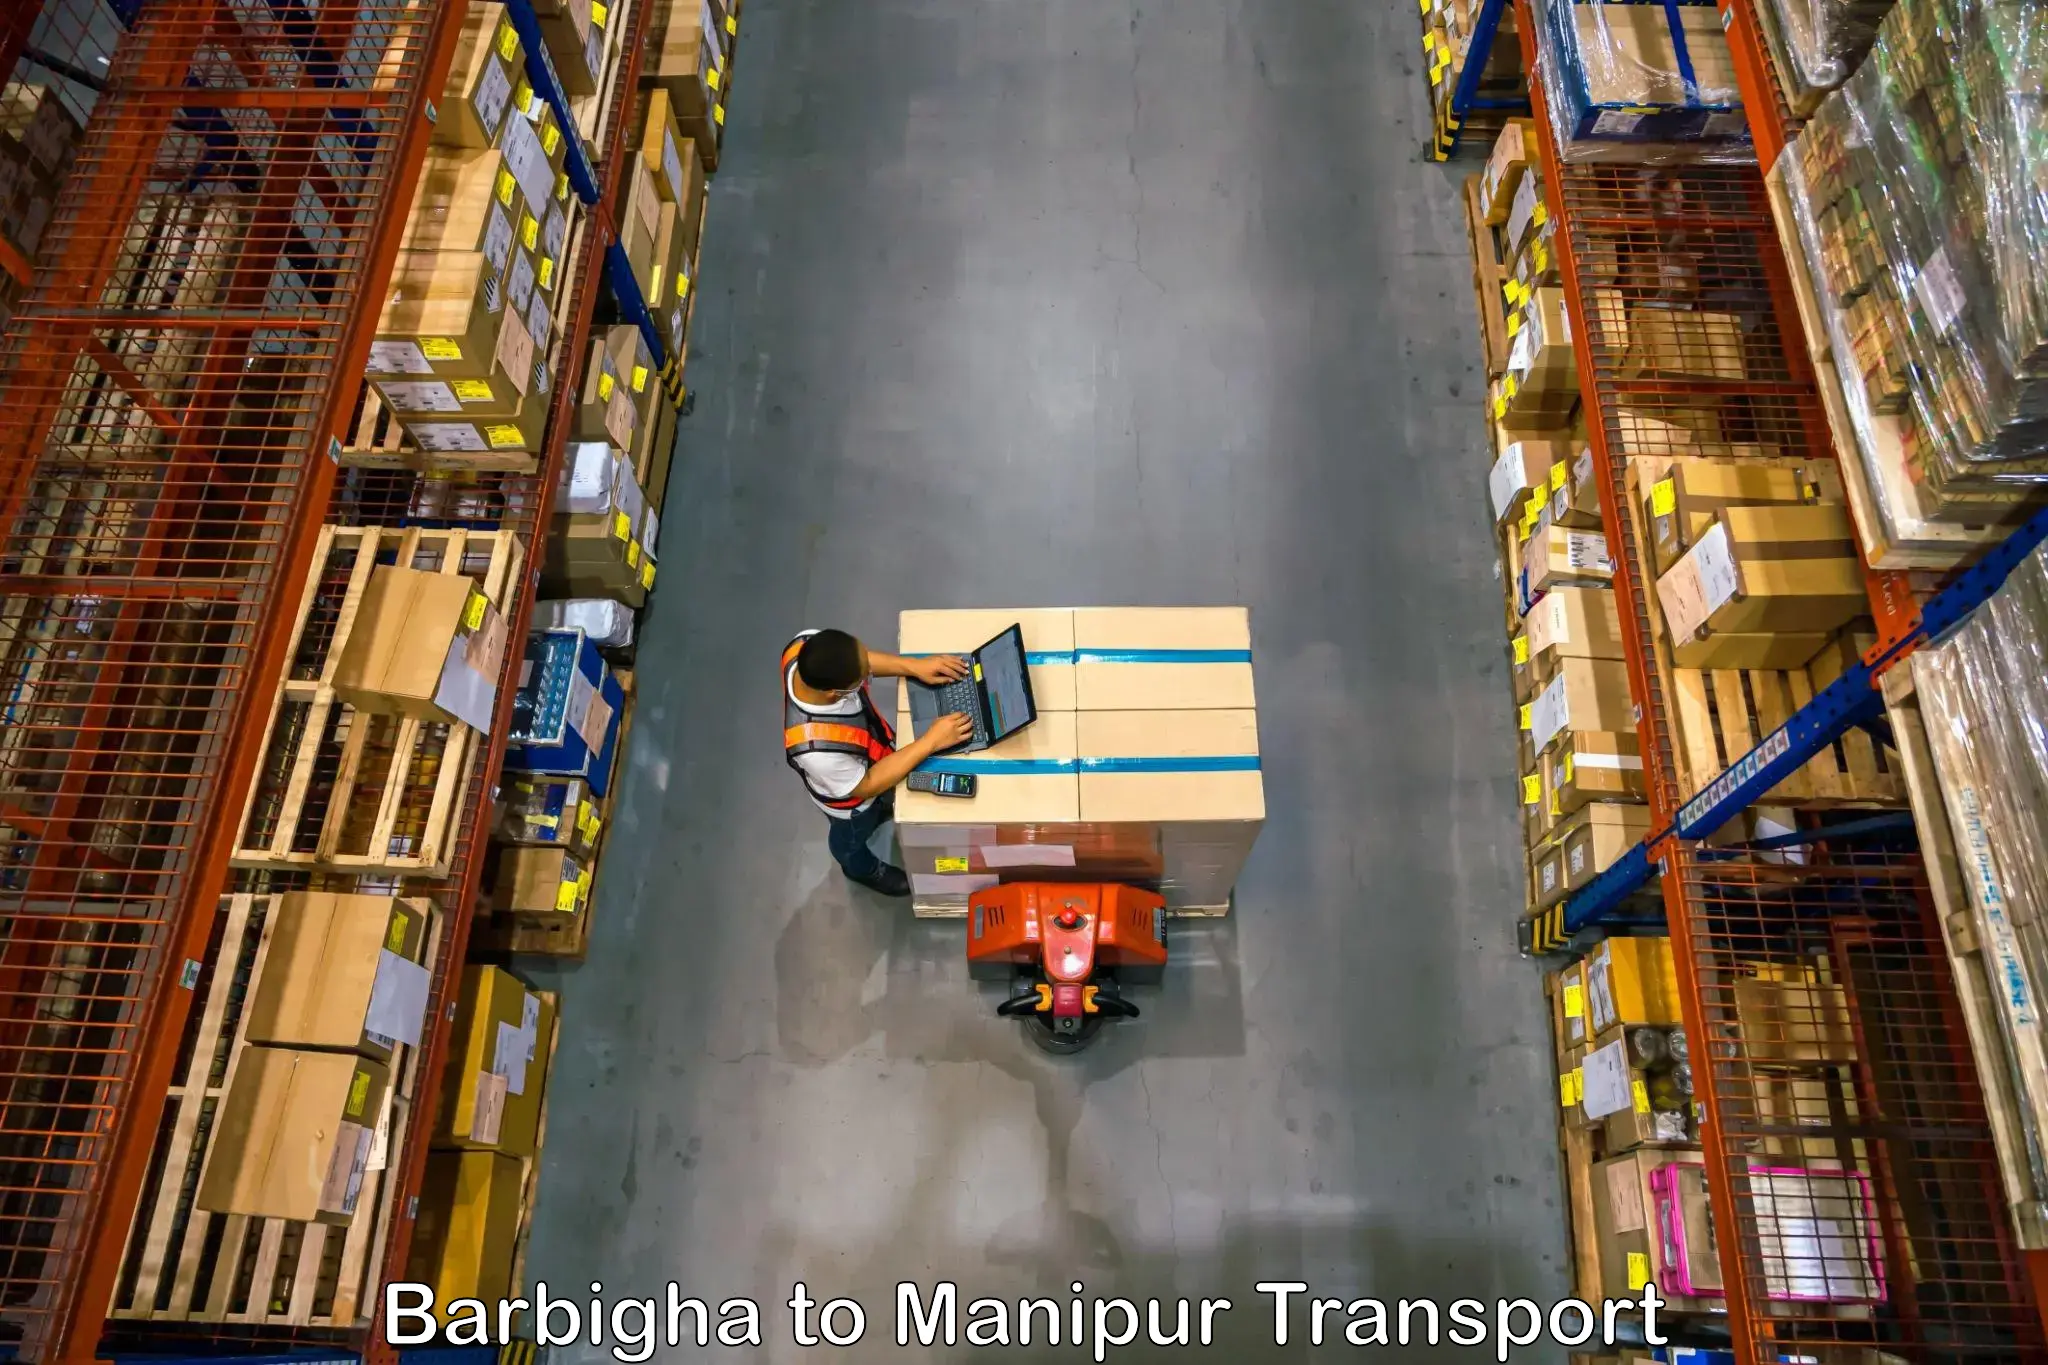 Daily parcel service transport Barbigha to Manipur